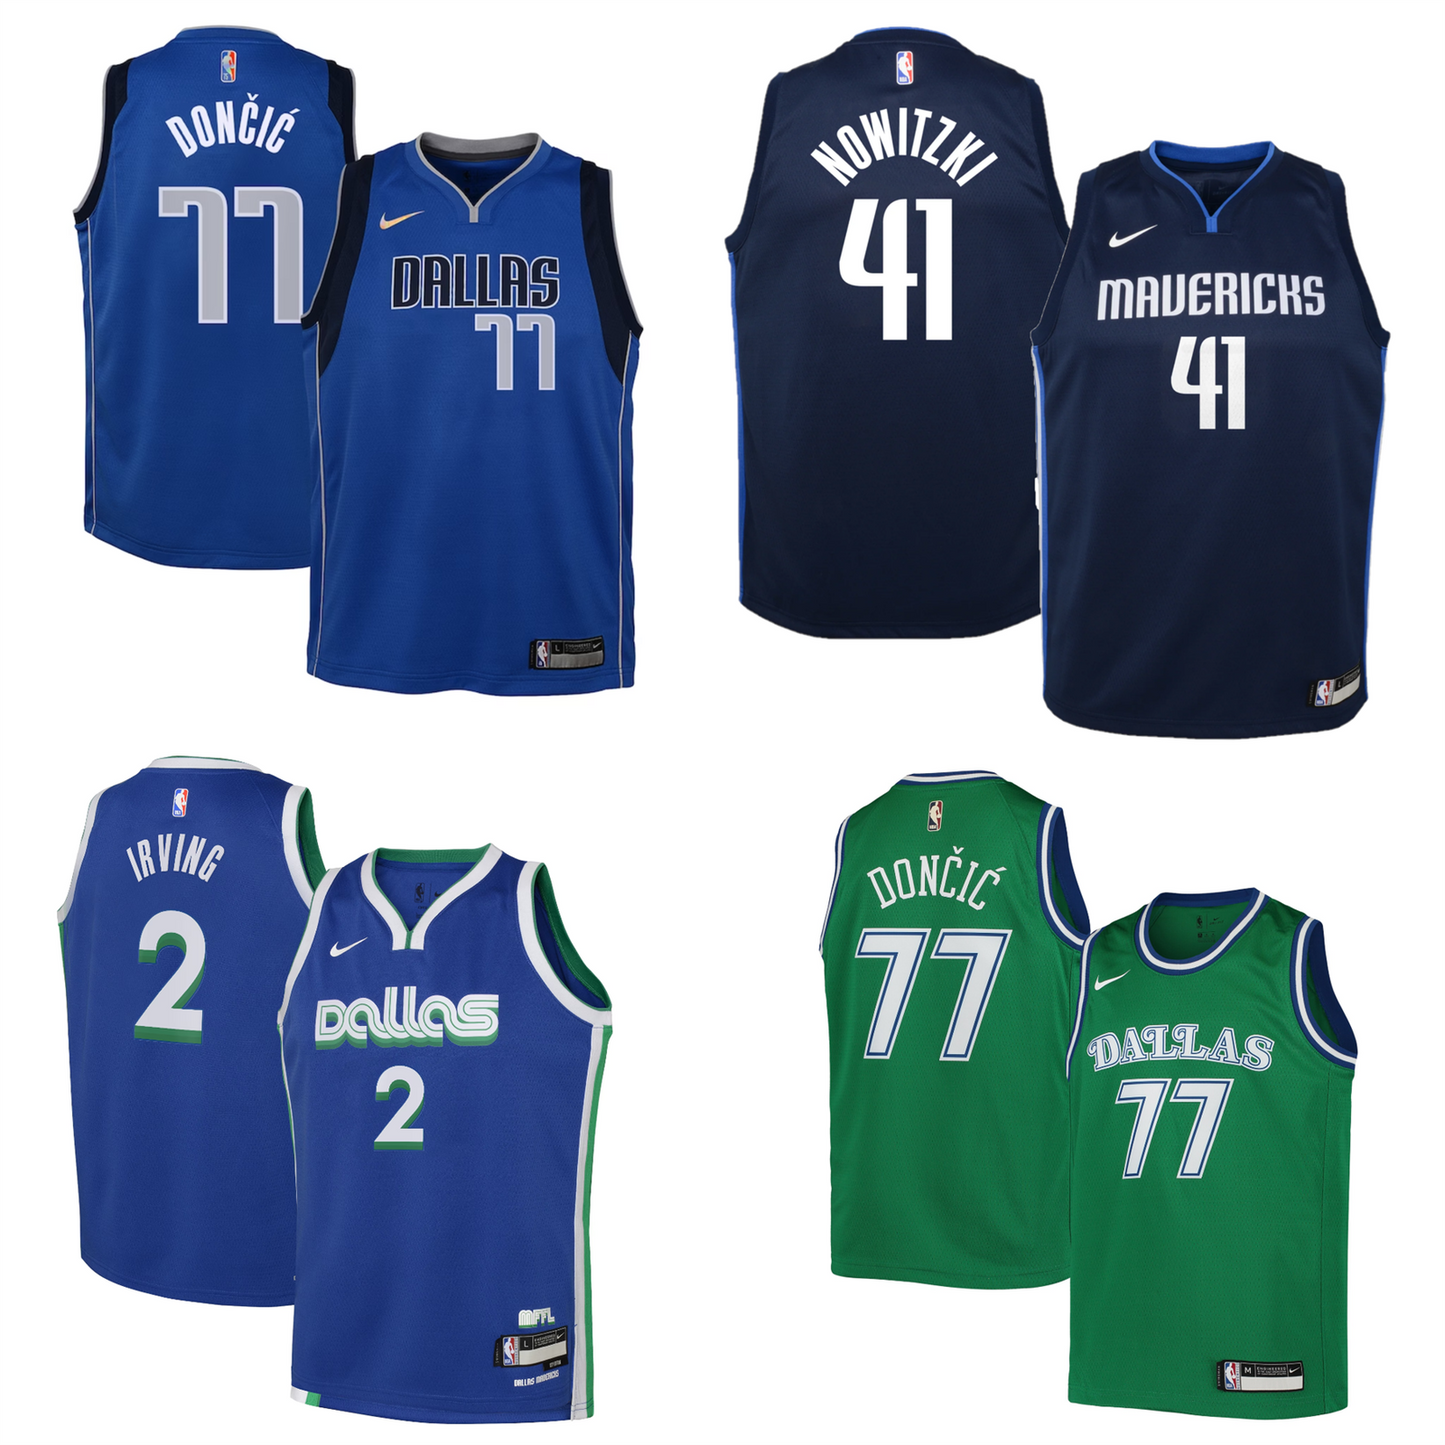 50x NBA Nike Mens Jersey Perfect Mix A Grade RRP £95 Only £25.00 each